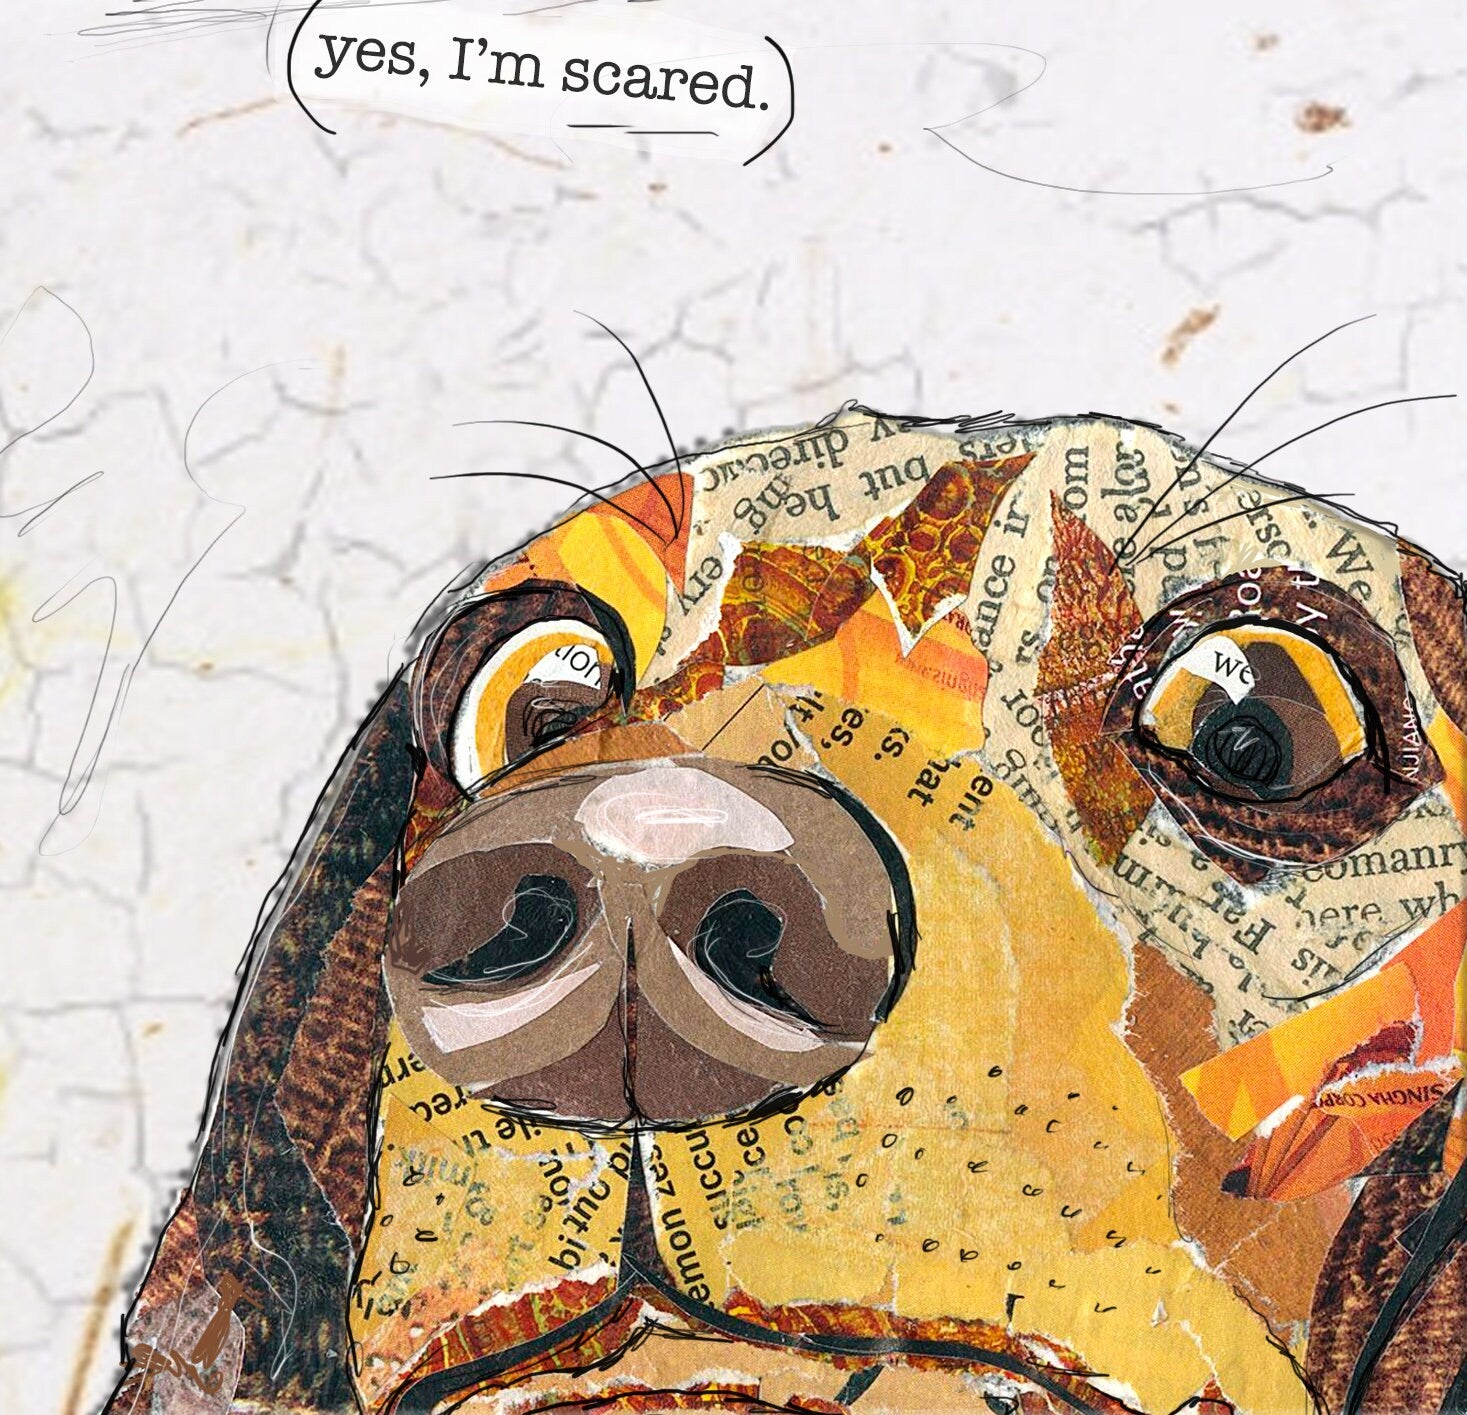 Greeting Card of mixed media collage of a scared dog, pets, worried face, funny text outside, Blank Inside